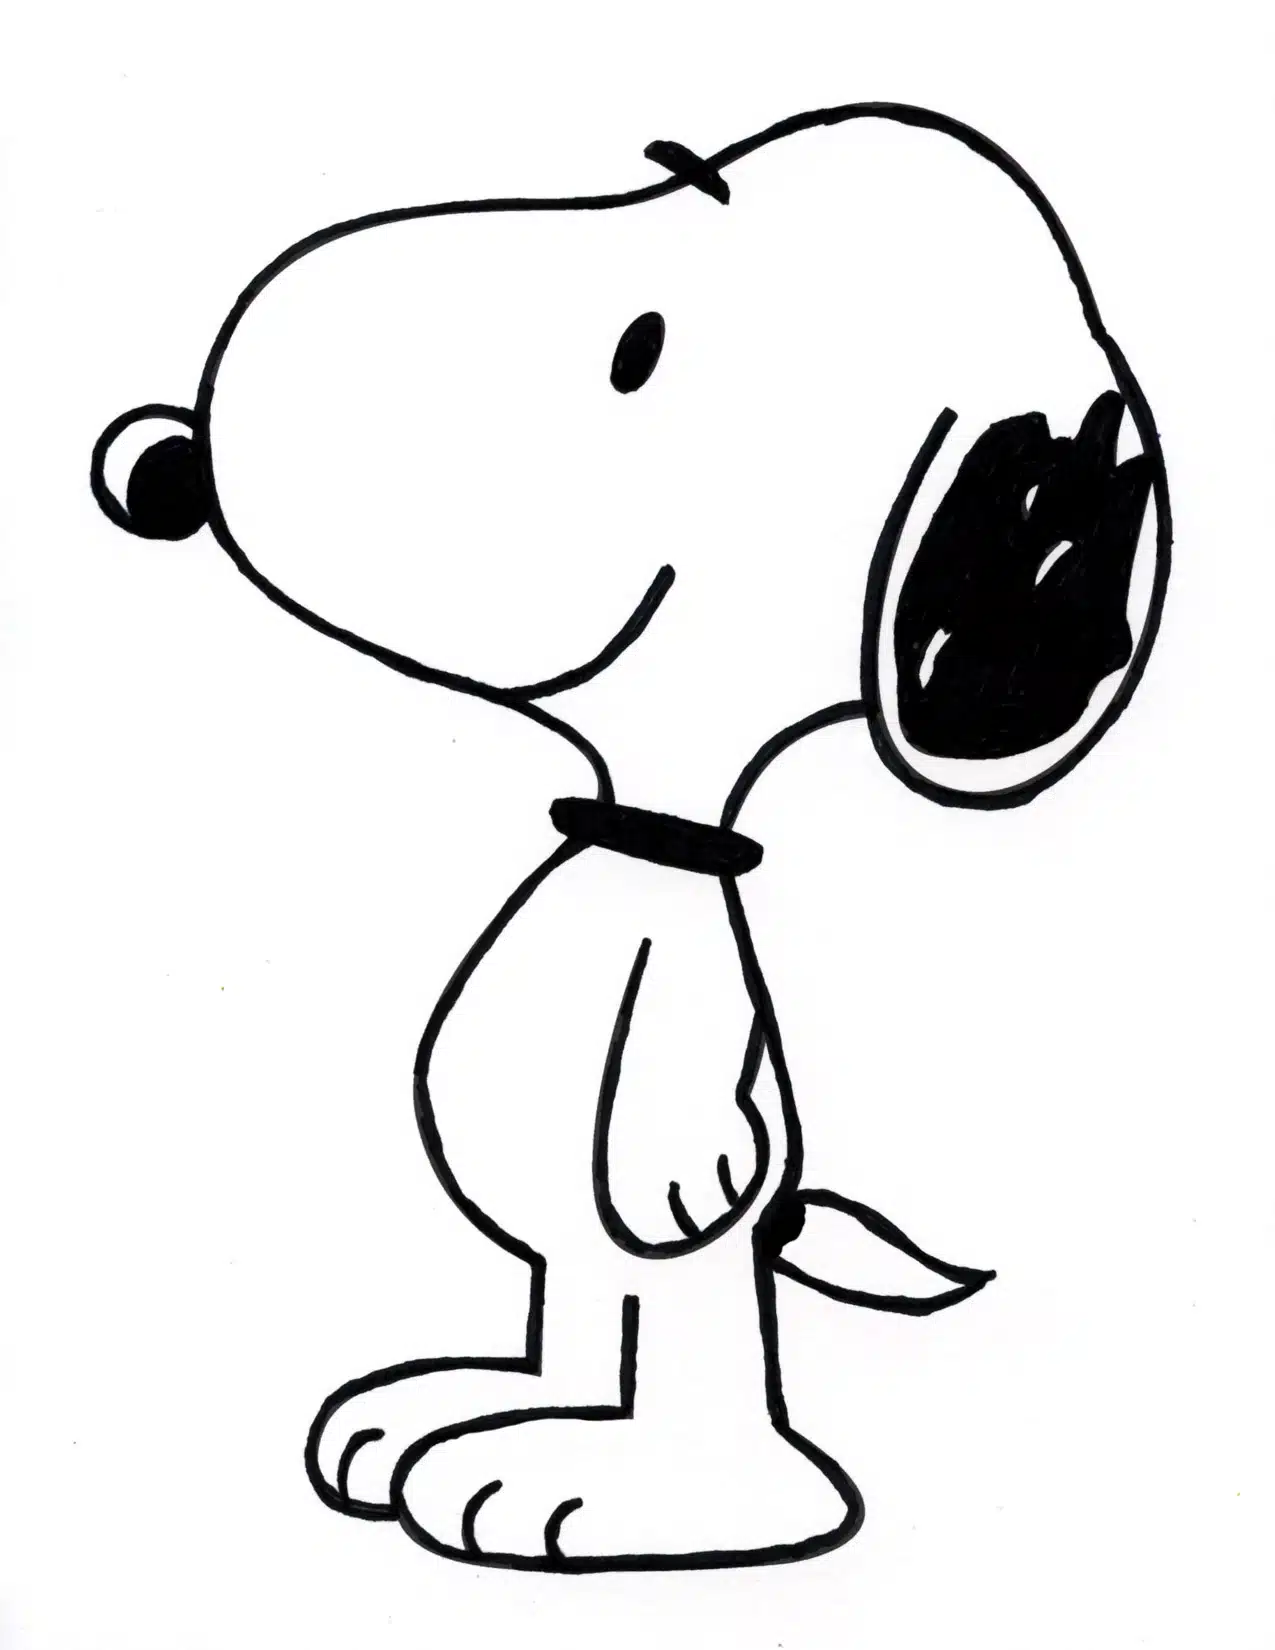 Easy How to Draw Snoopy Tutorial and Snoopy Coloring Page